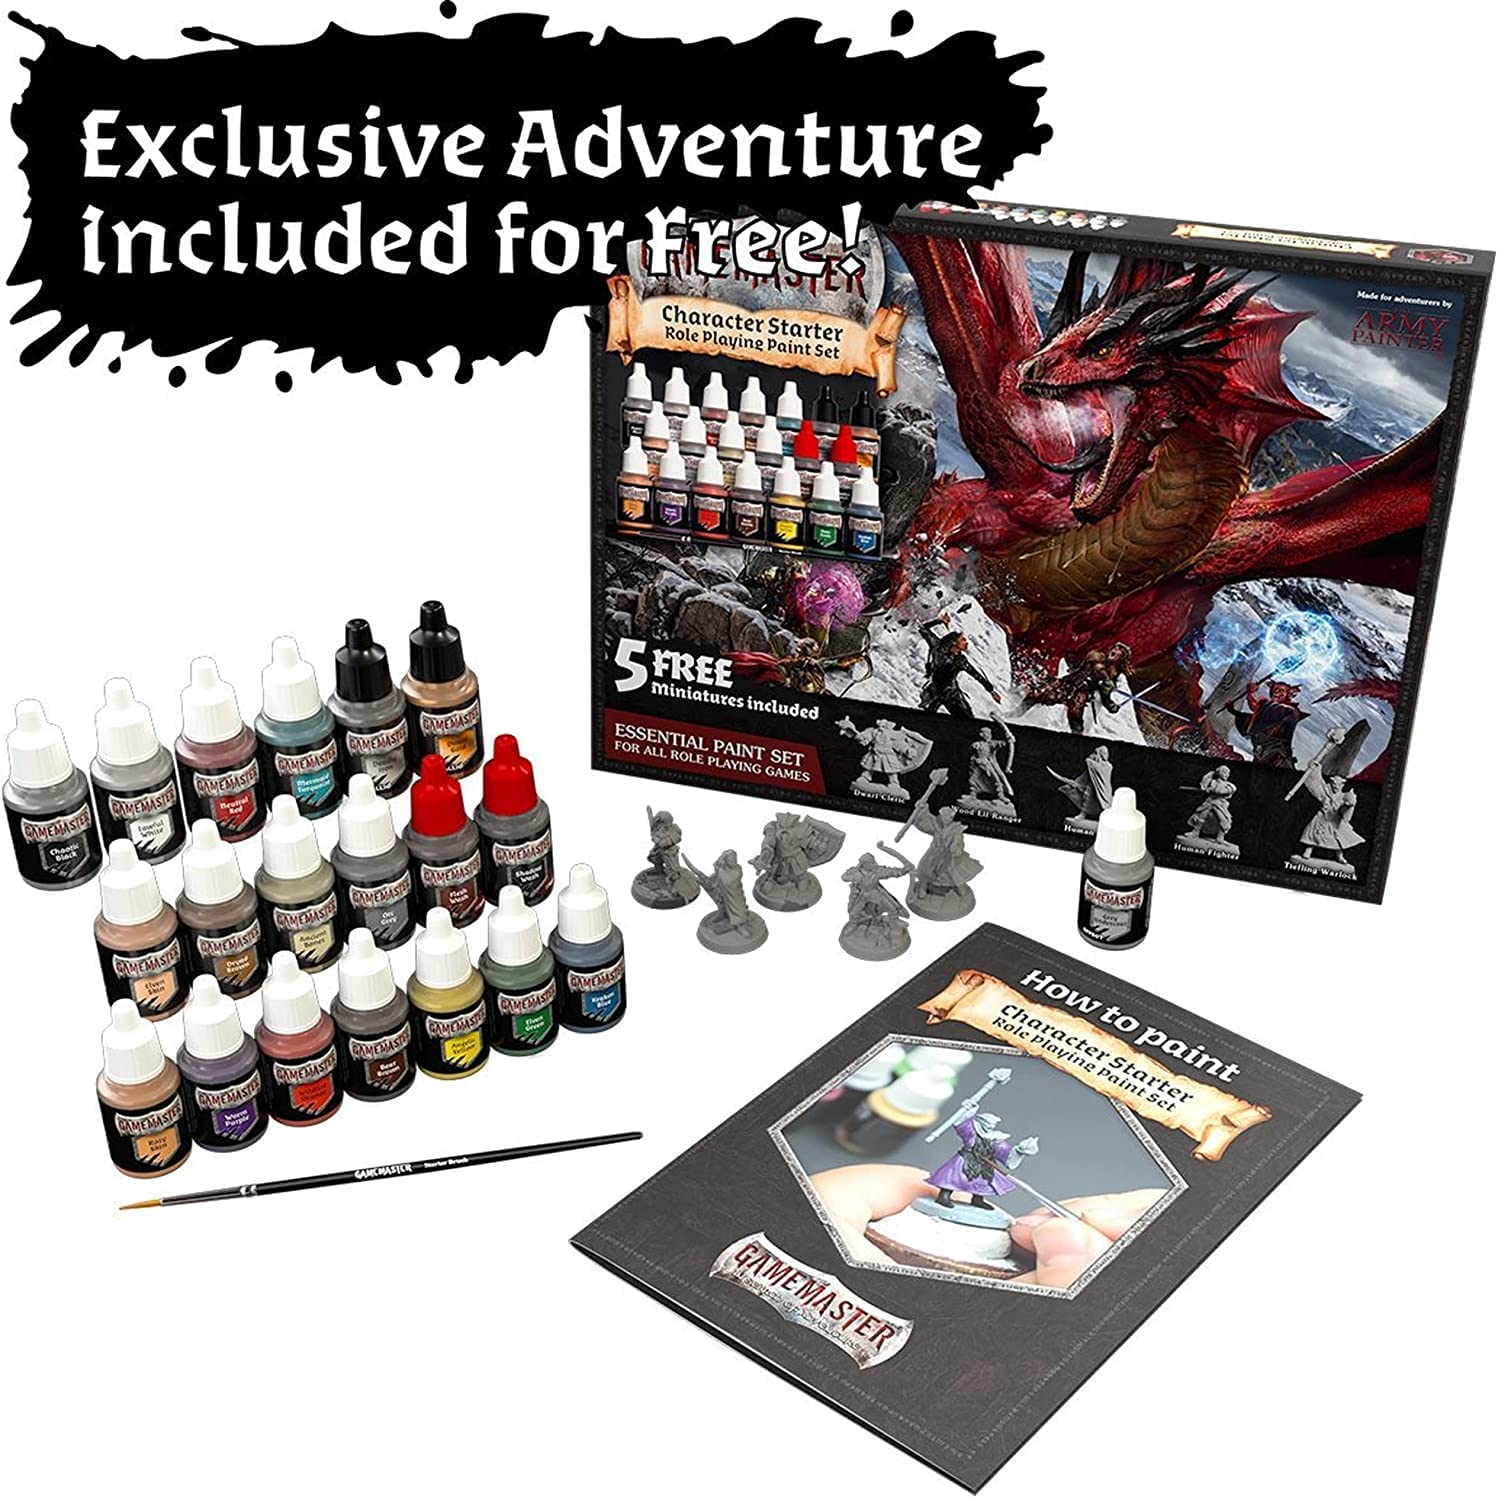 The Army Painter Dungeons and Dragons Miniature Painting Kit Bundle with  Monsters and Adventurer's Acrylic Paint Set and Nolzurs Marvelous Brush Set  Miniature Paint Brushes for DND Miniatures – Wargames Delivered